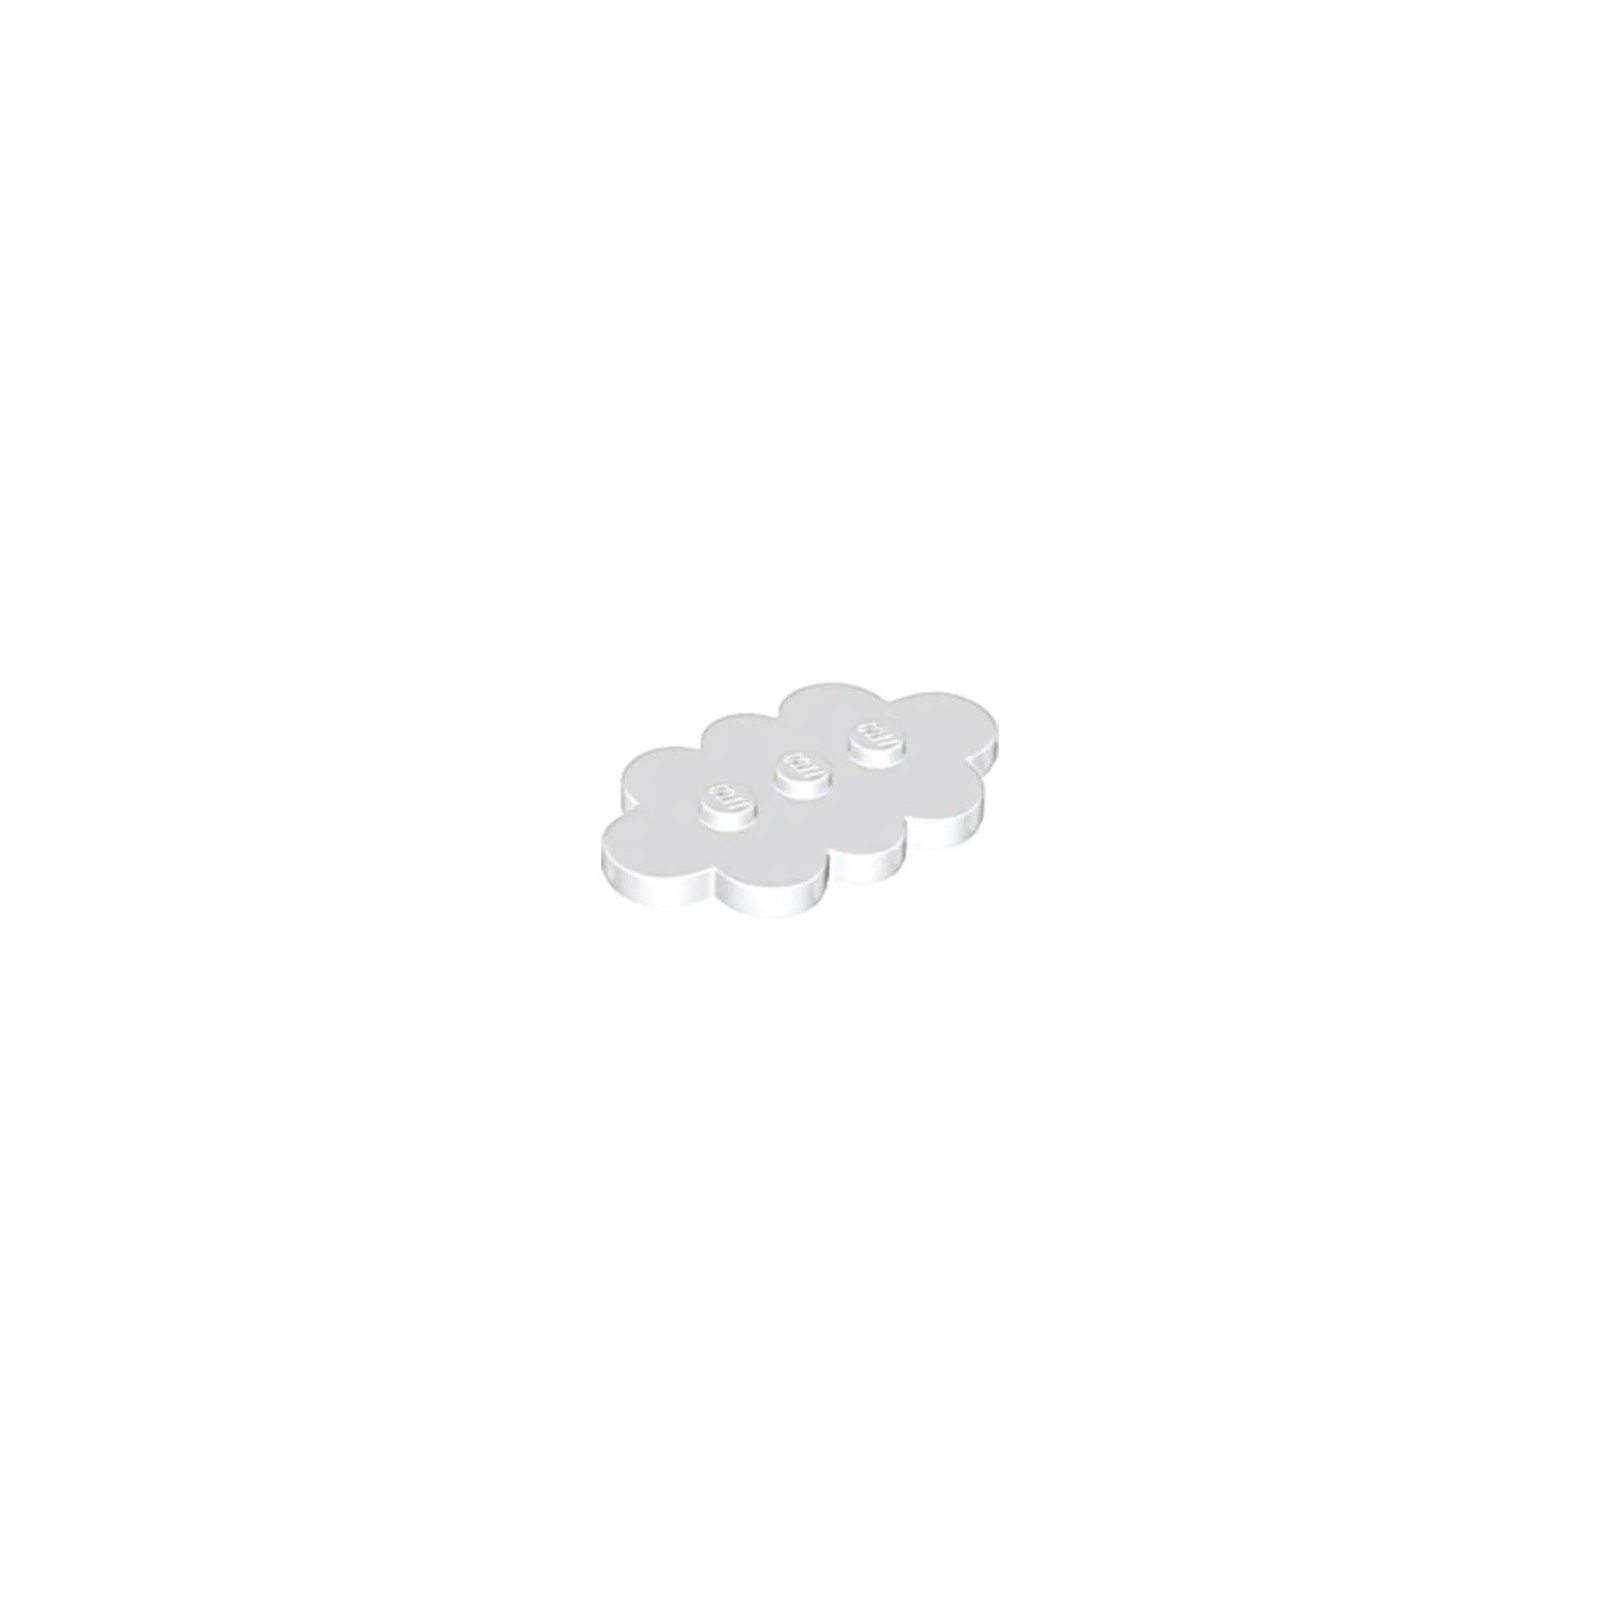 Tile Special 3x5 Cloud with 3 Center Studs - LEGO® Part 35470